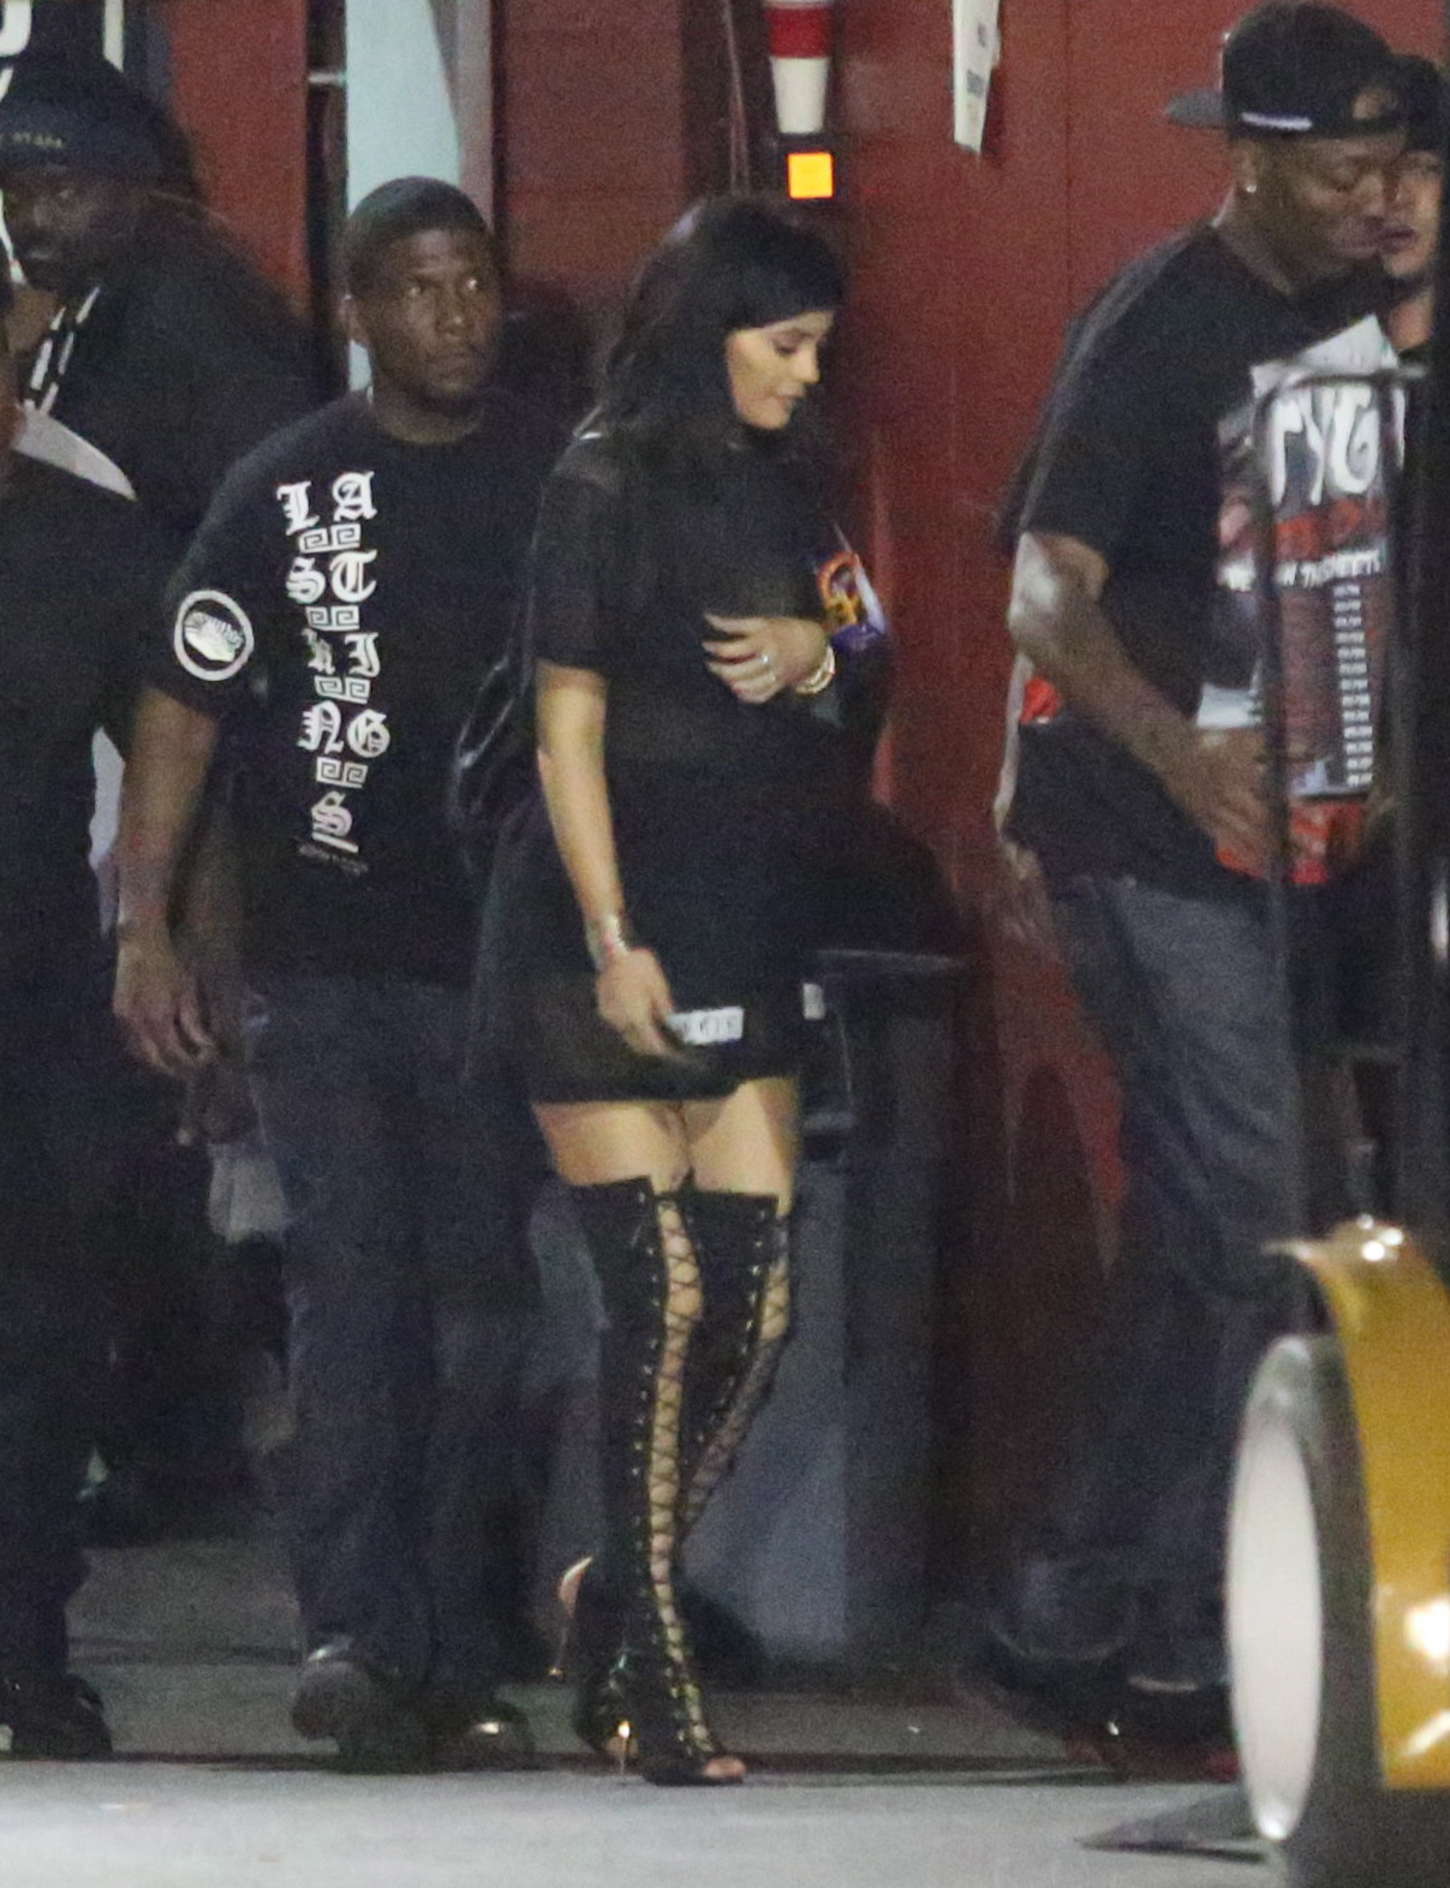 Kylie Jenner at The Forum in Inglewood